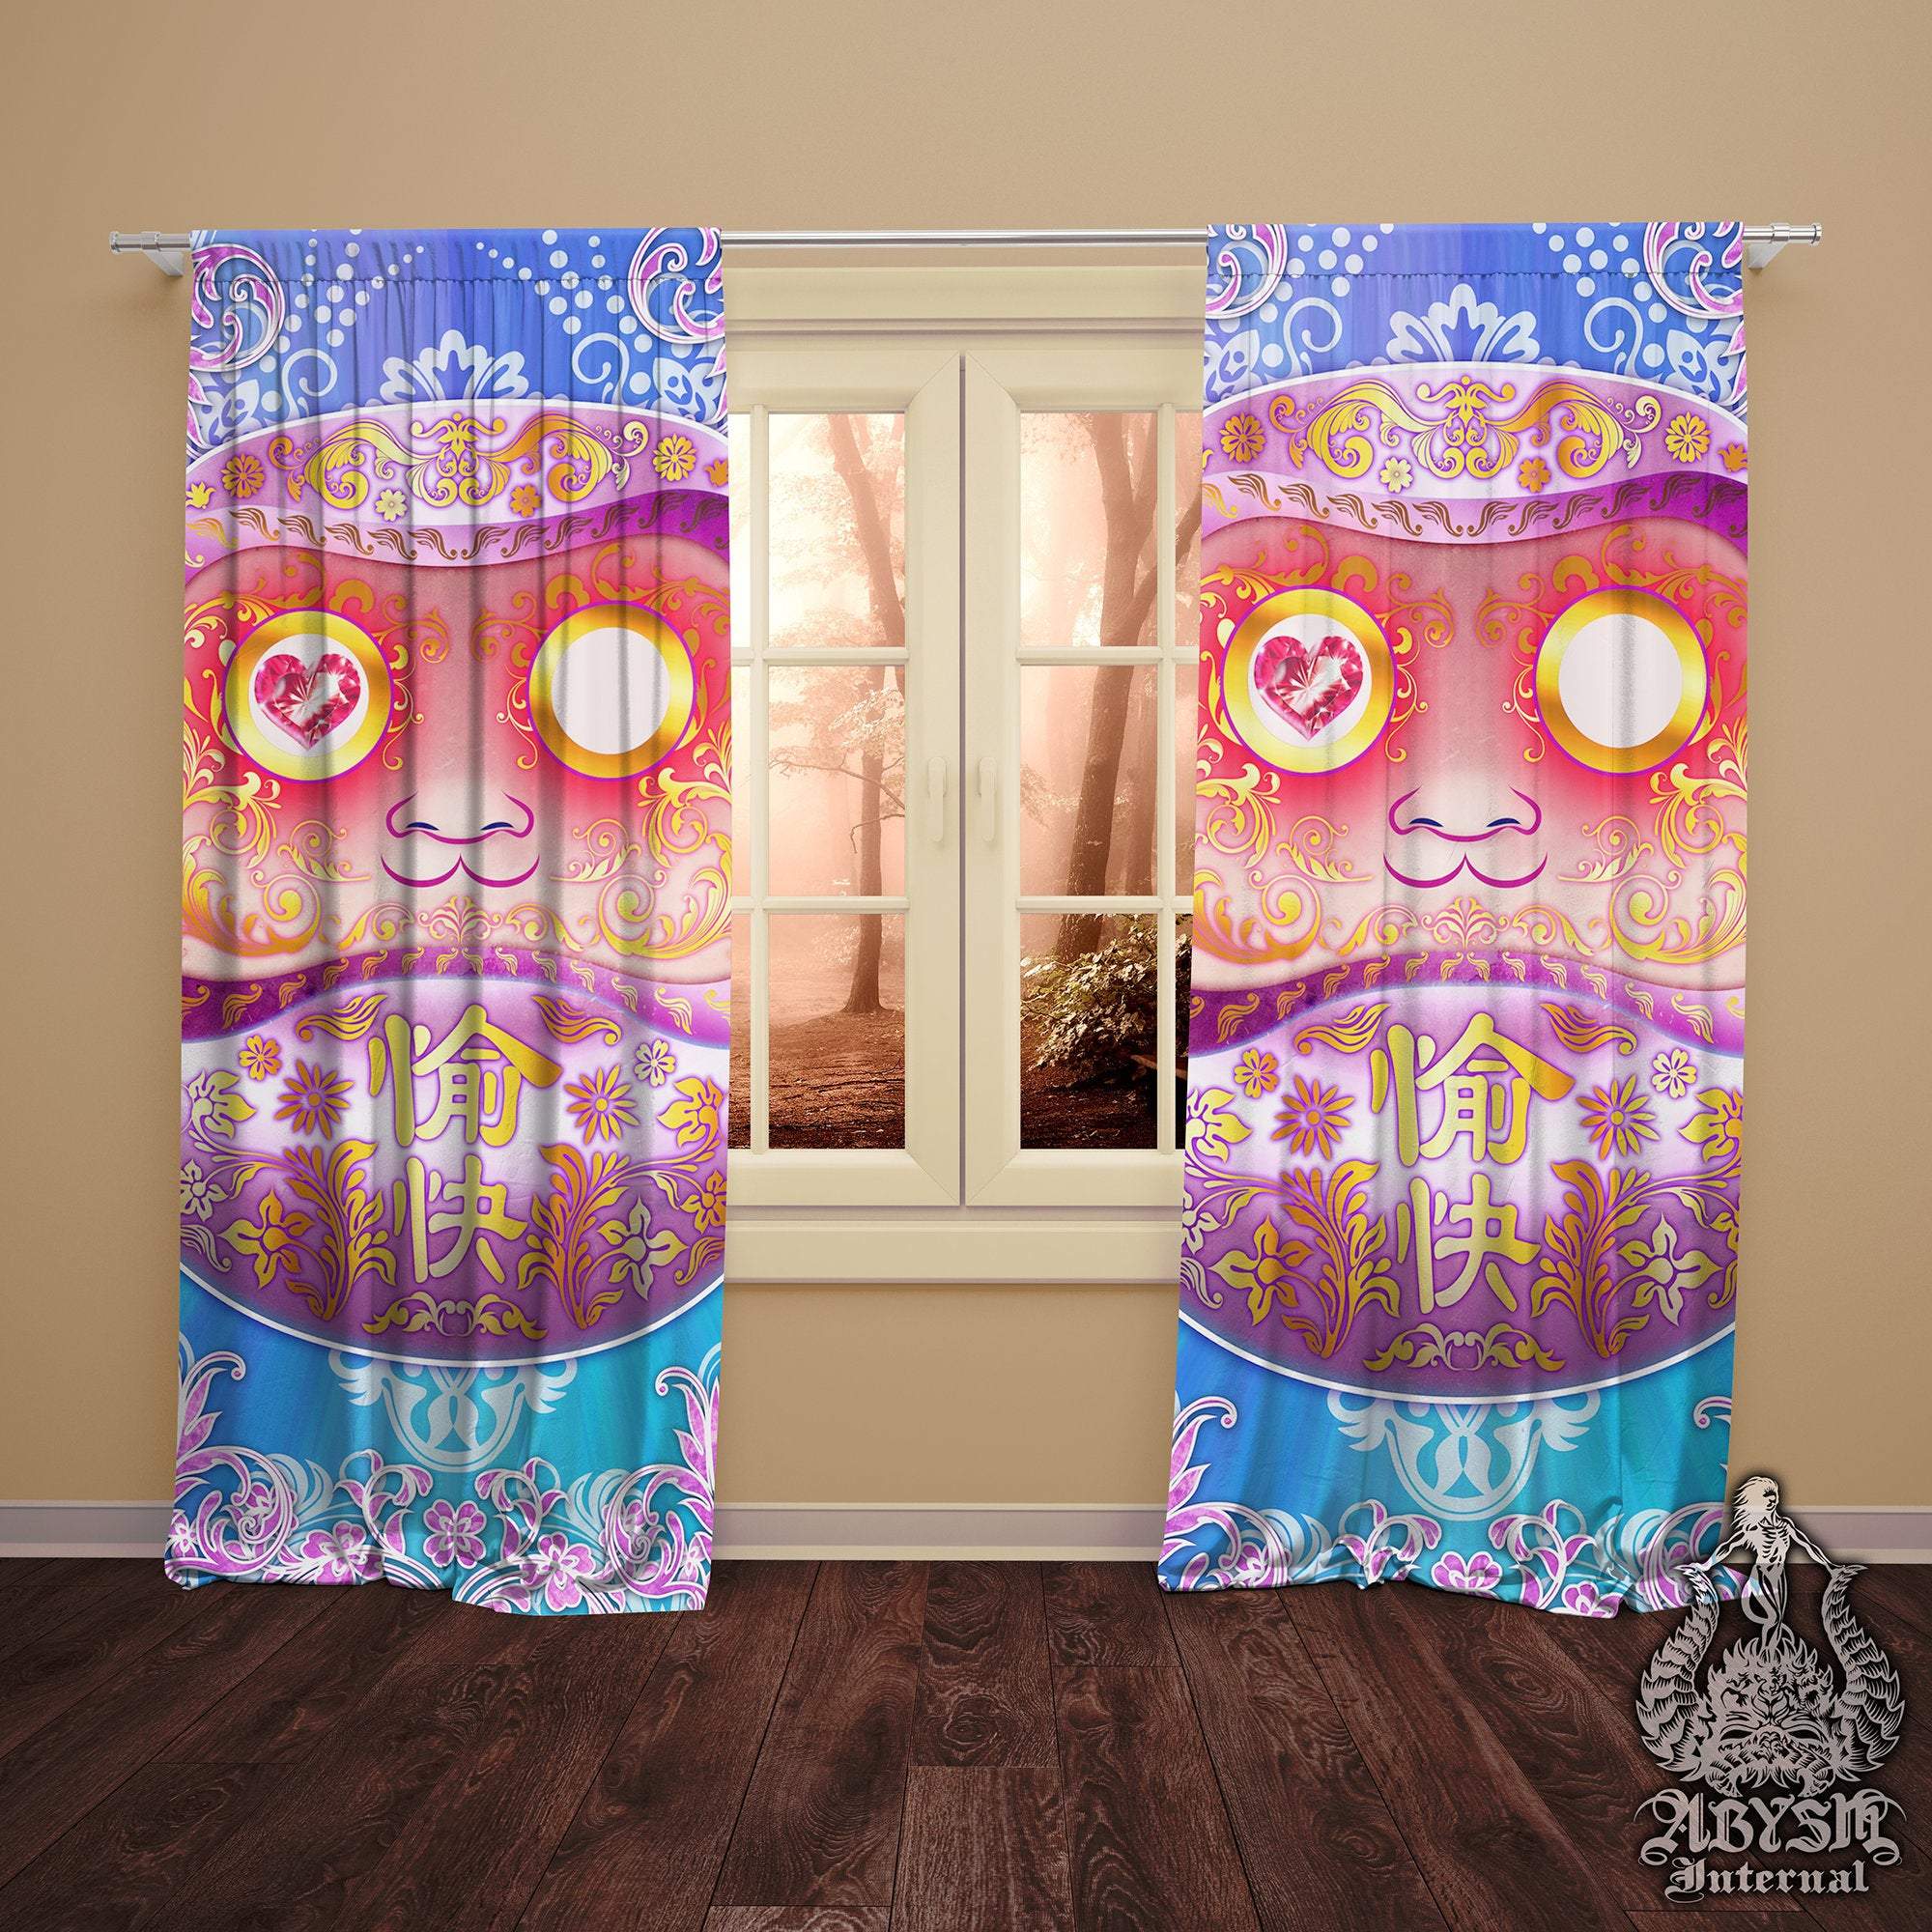 Kawaii Blackout Curtains, Long Window Panels, Funny Pastel Daruma, Anime Decor, Art Print, Funky and Eclectic Home Decor - Holographic and Aesthetic Room Decor - Abysm Internal